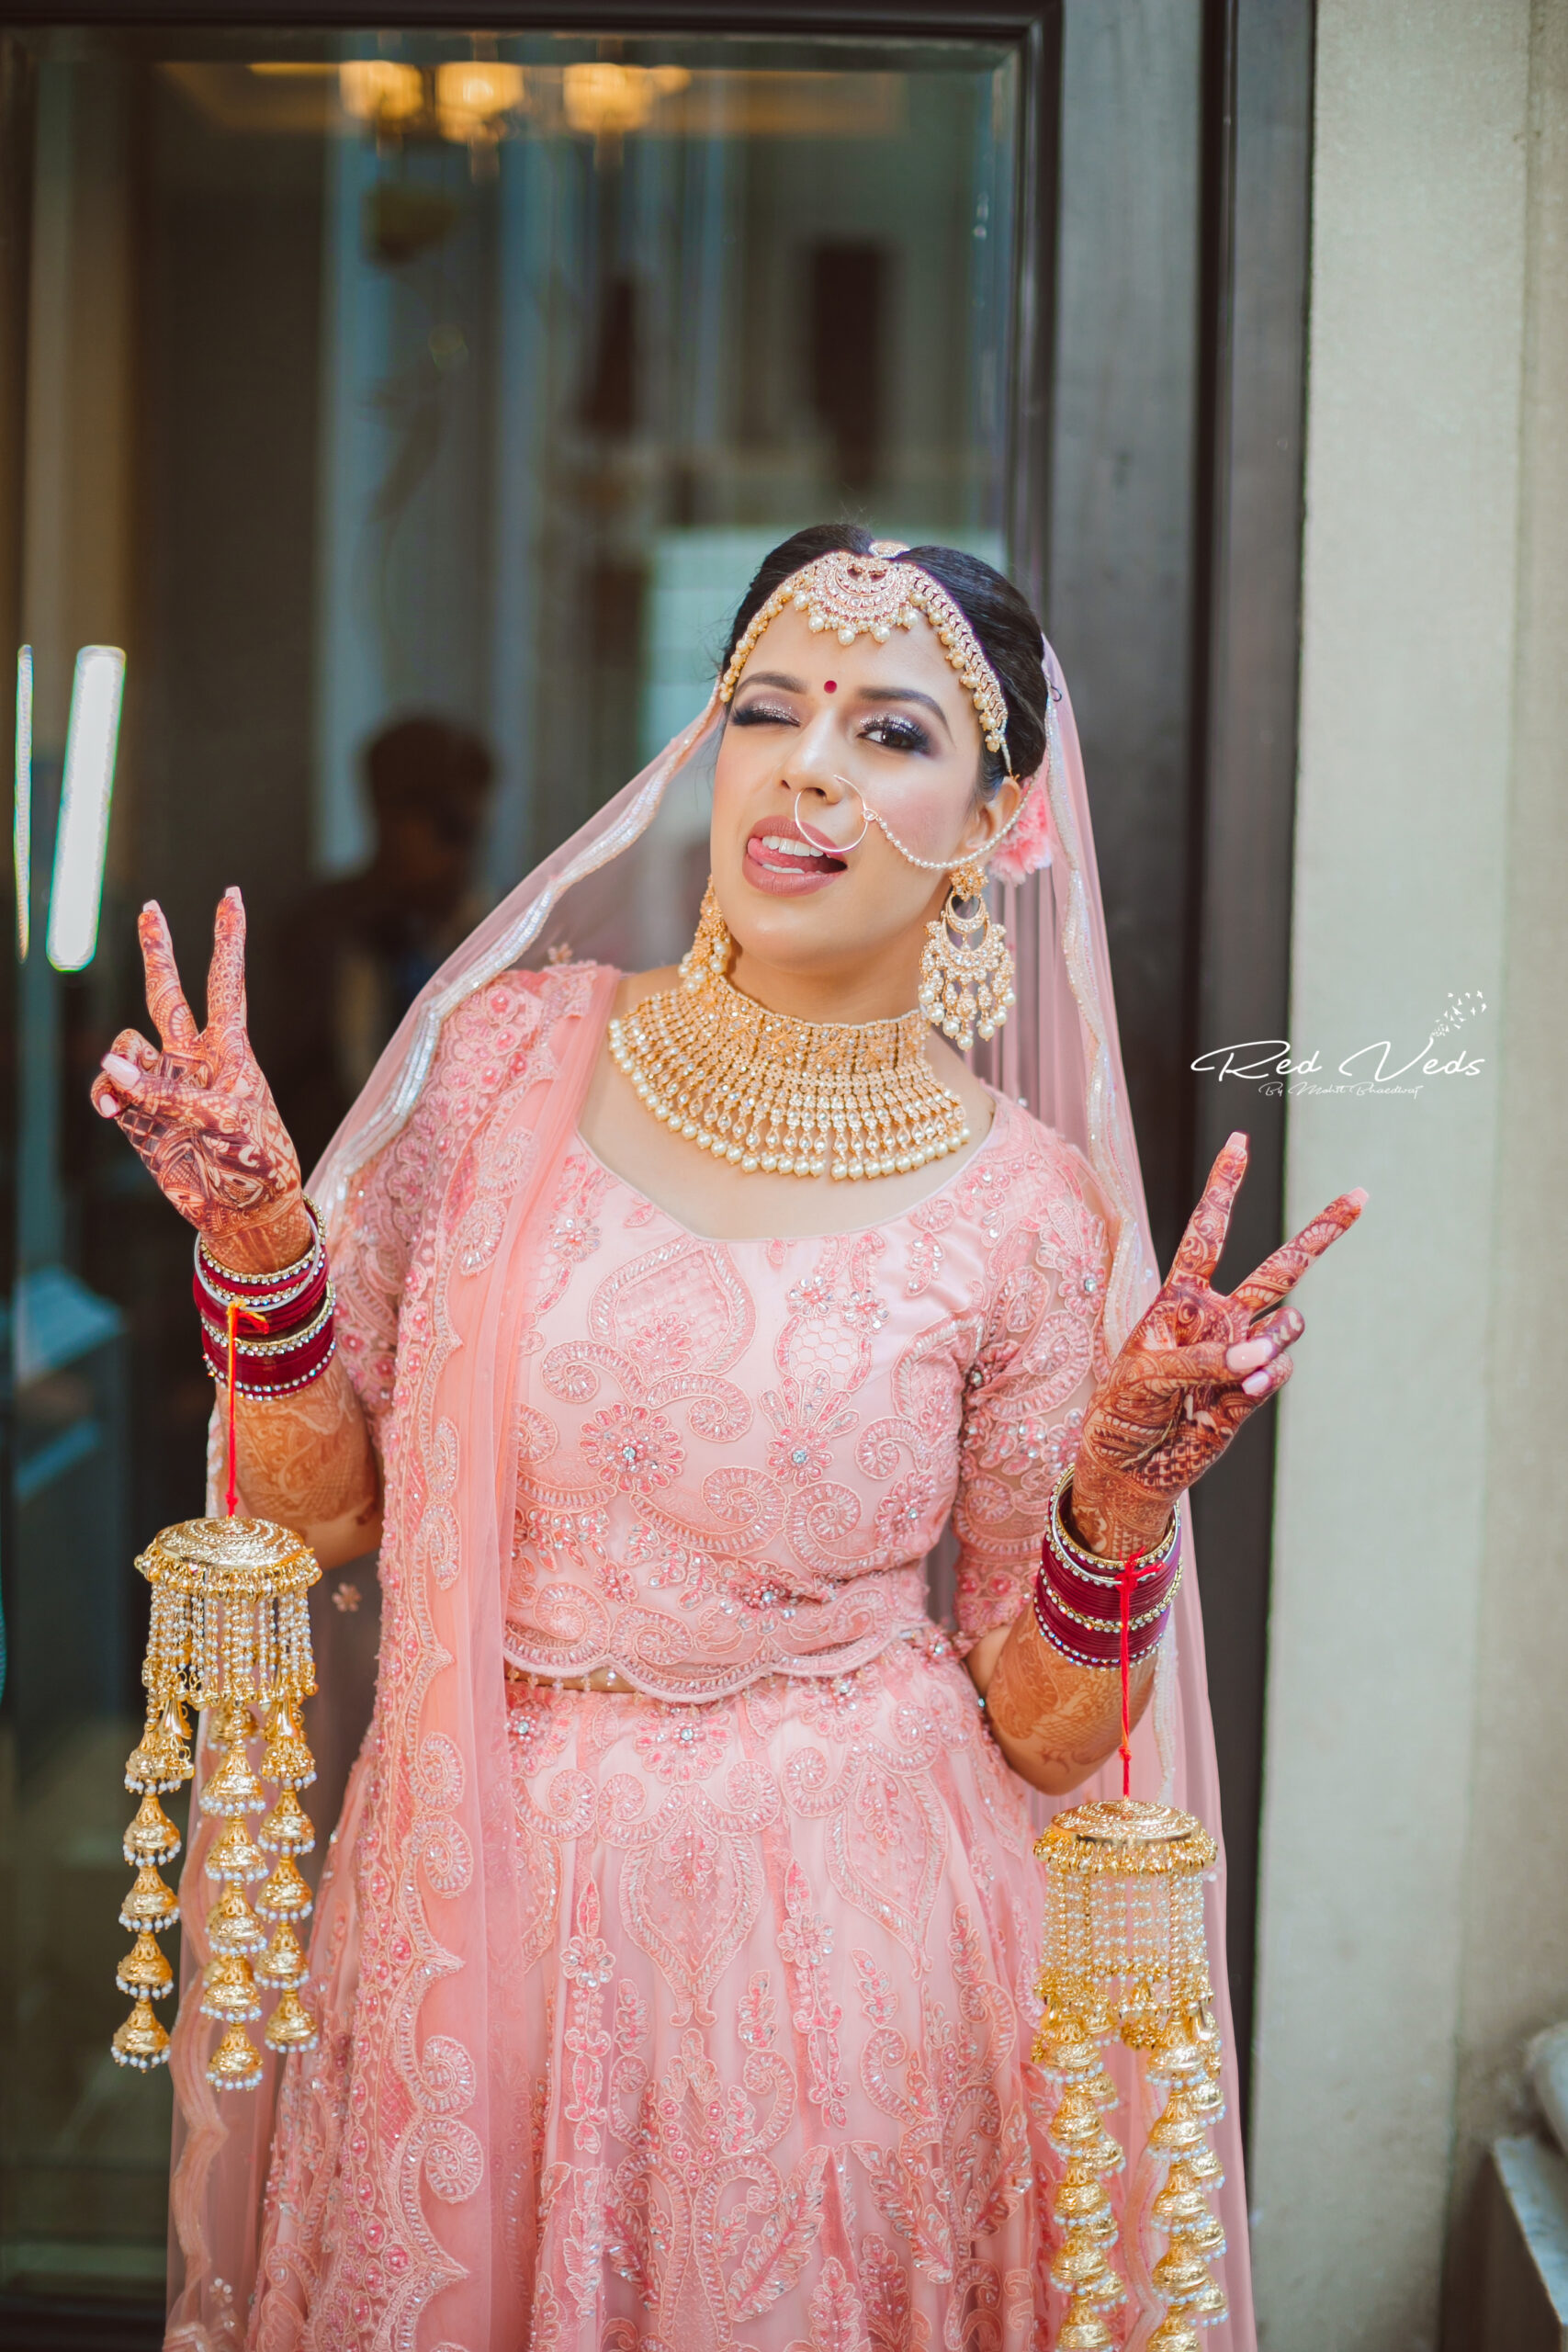 19 Likes, 0 Comments - 🔥🅼🅰🆁🅰🆃🅷🅸_🅿🅷🅾🆃🅾🅶🅰🅴🅰🅿🅷🆈🎯… |  Indian bride photography poses, Indian wedding photography, Indian wedding  photography couples